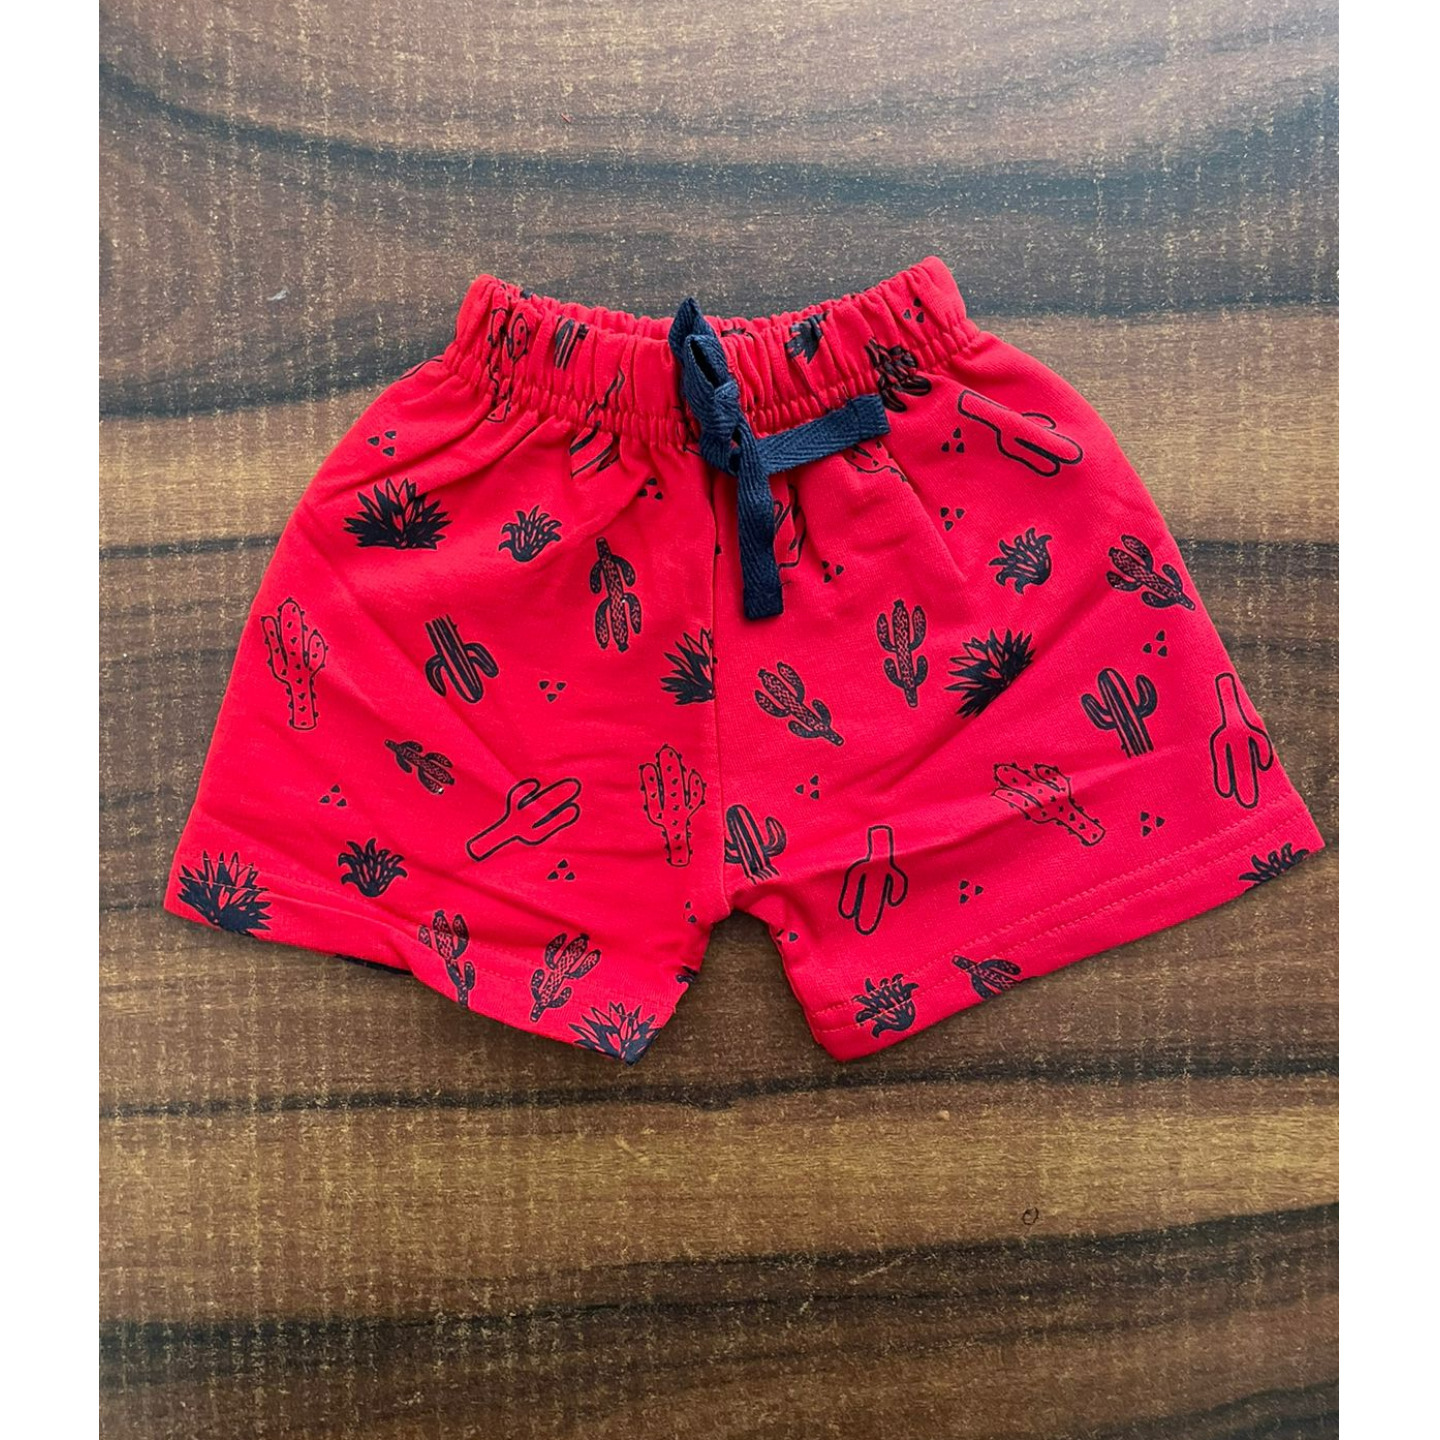 Cucumber NikarShorts Rs 140 Only Made In India Small Size 0 to 6 Months